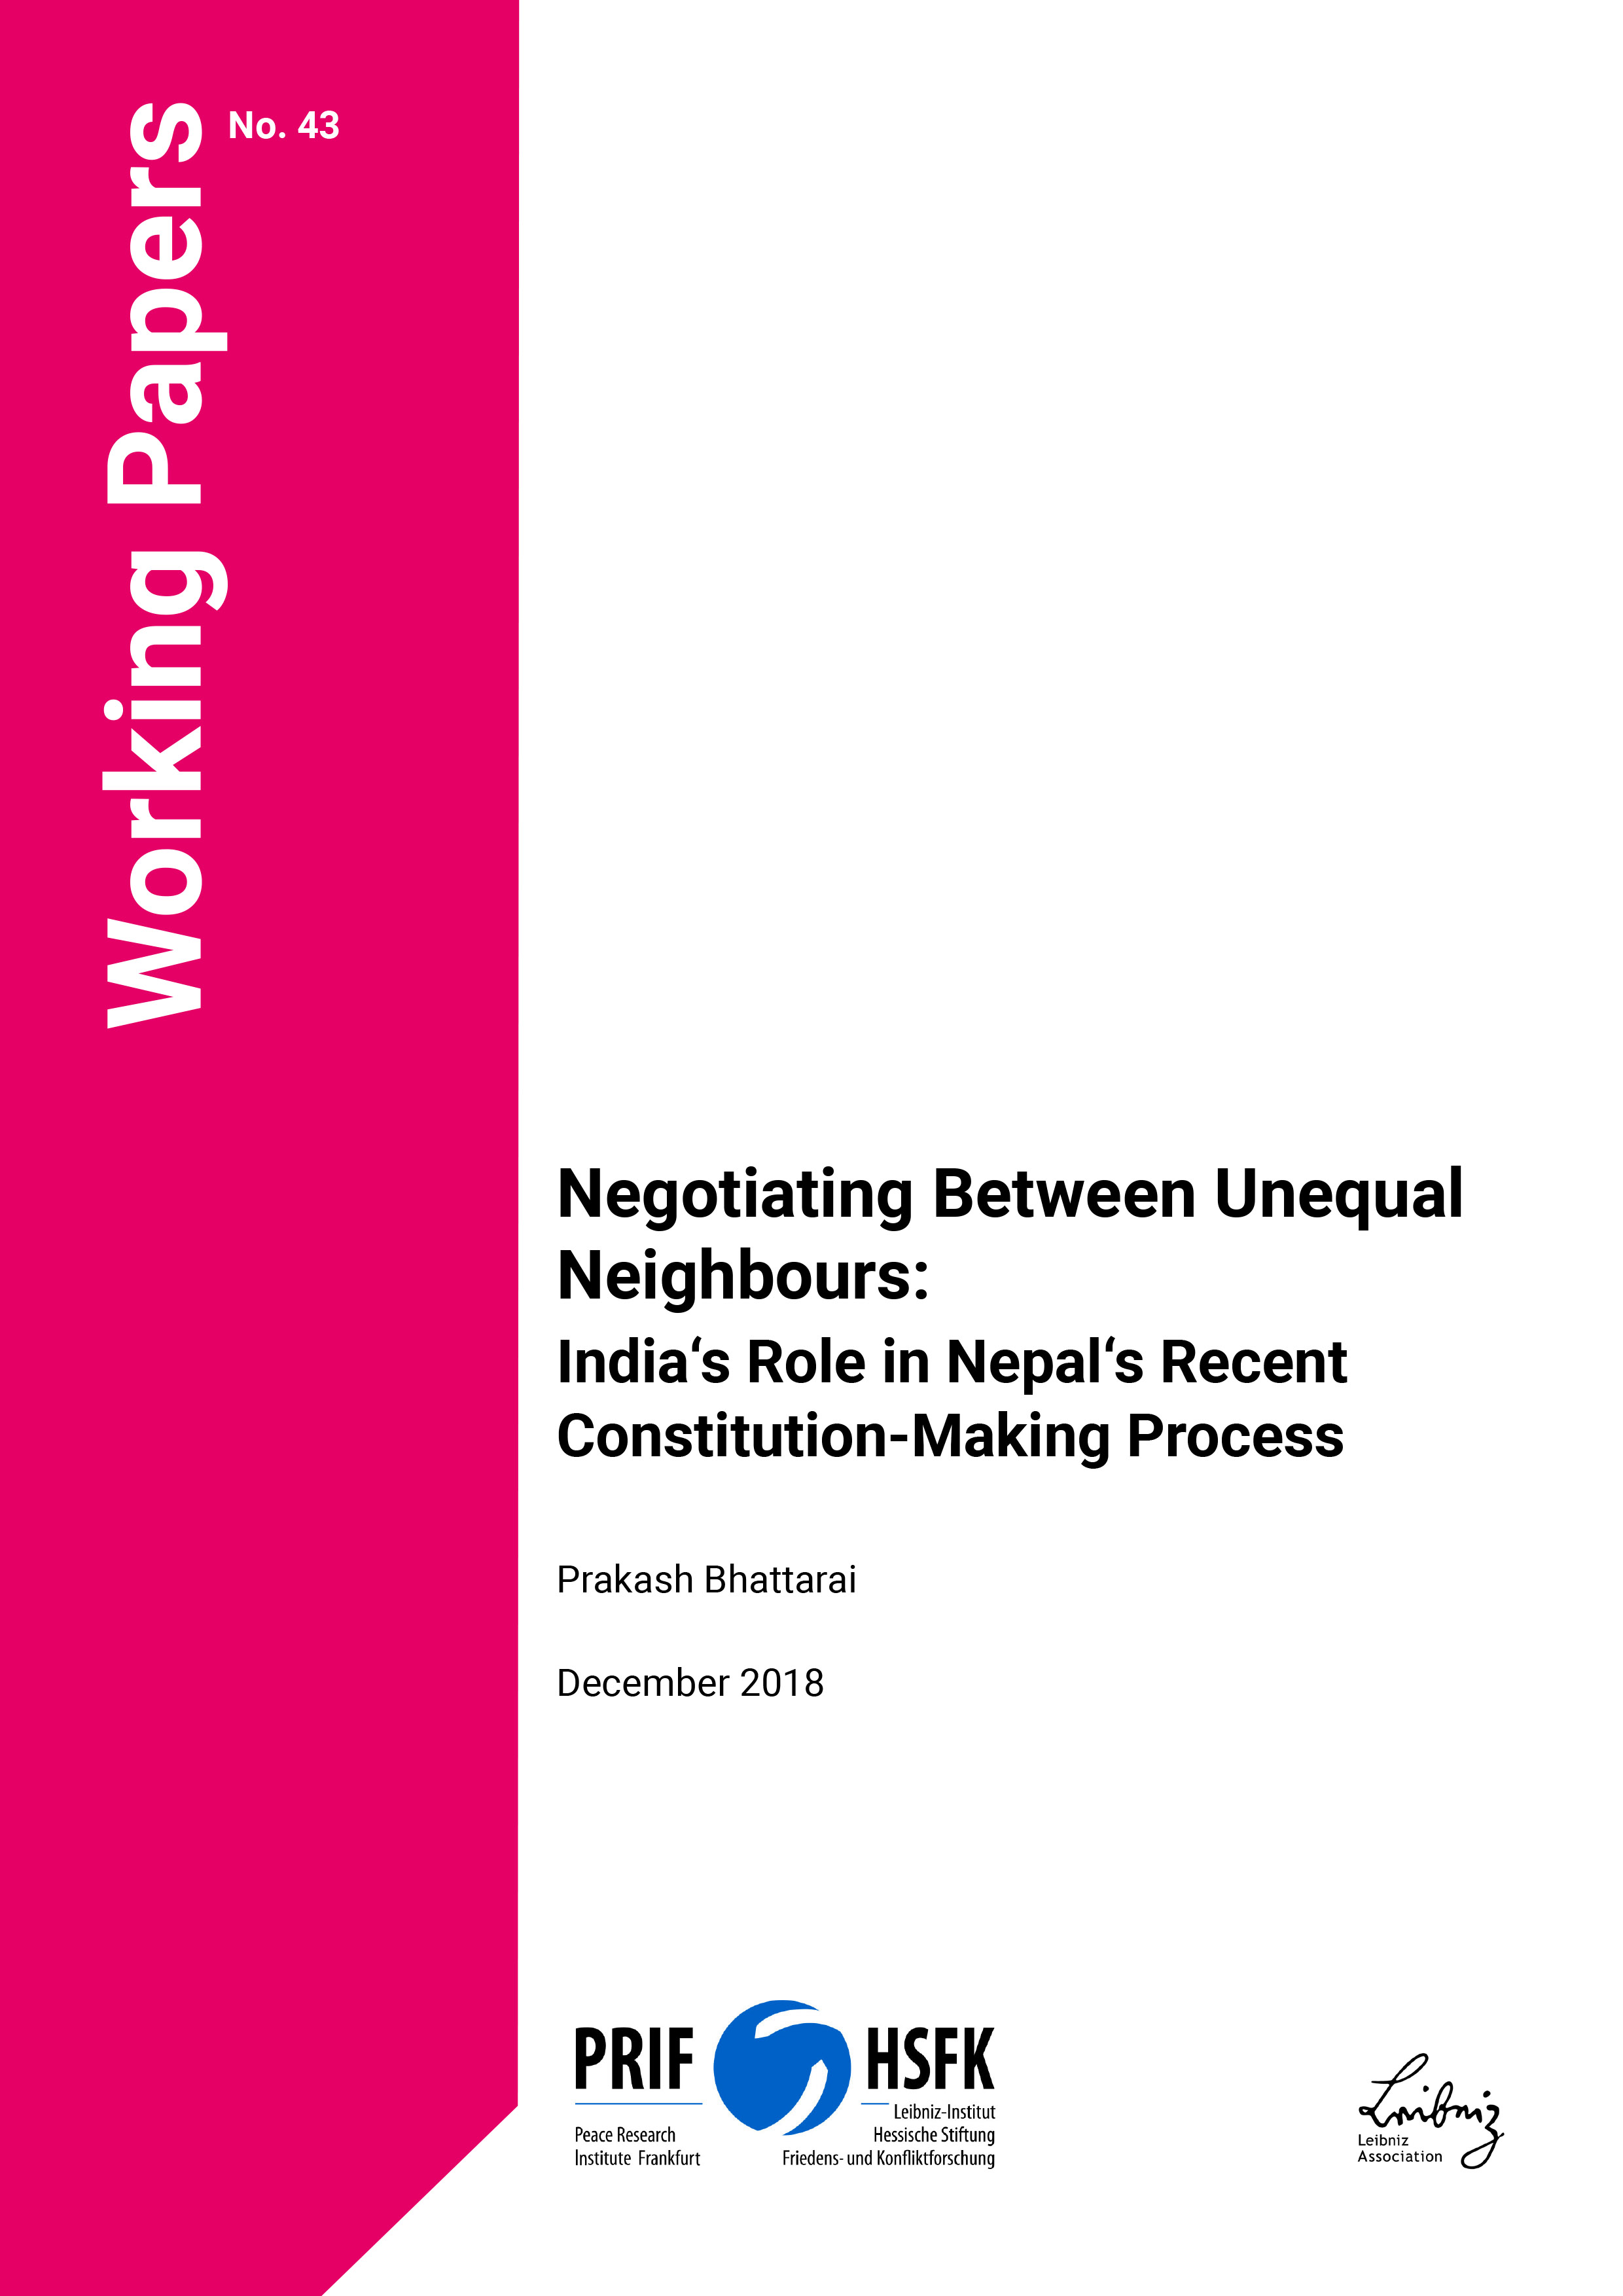 Download: Negotiating Between Unequal Neighbours: India's Role in Nepal's Recent Constitution-Making Process